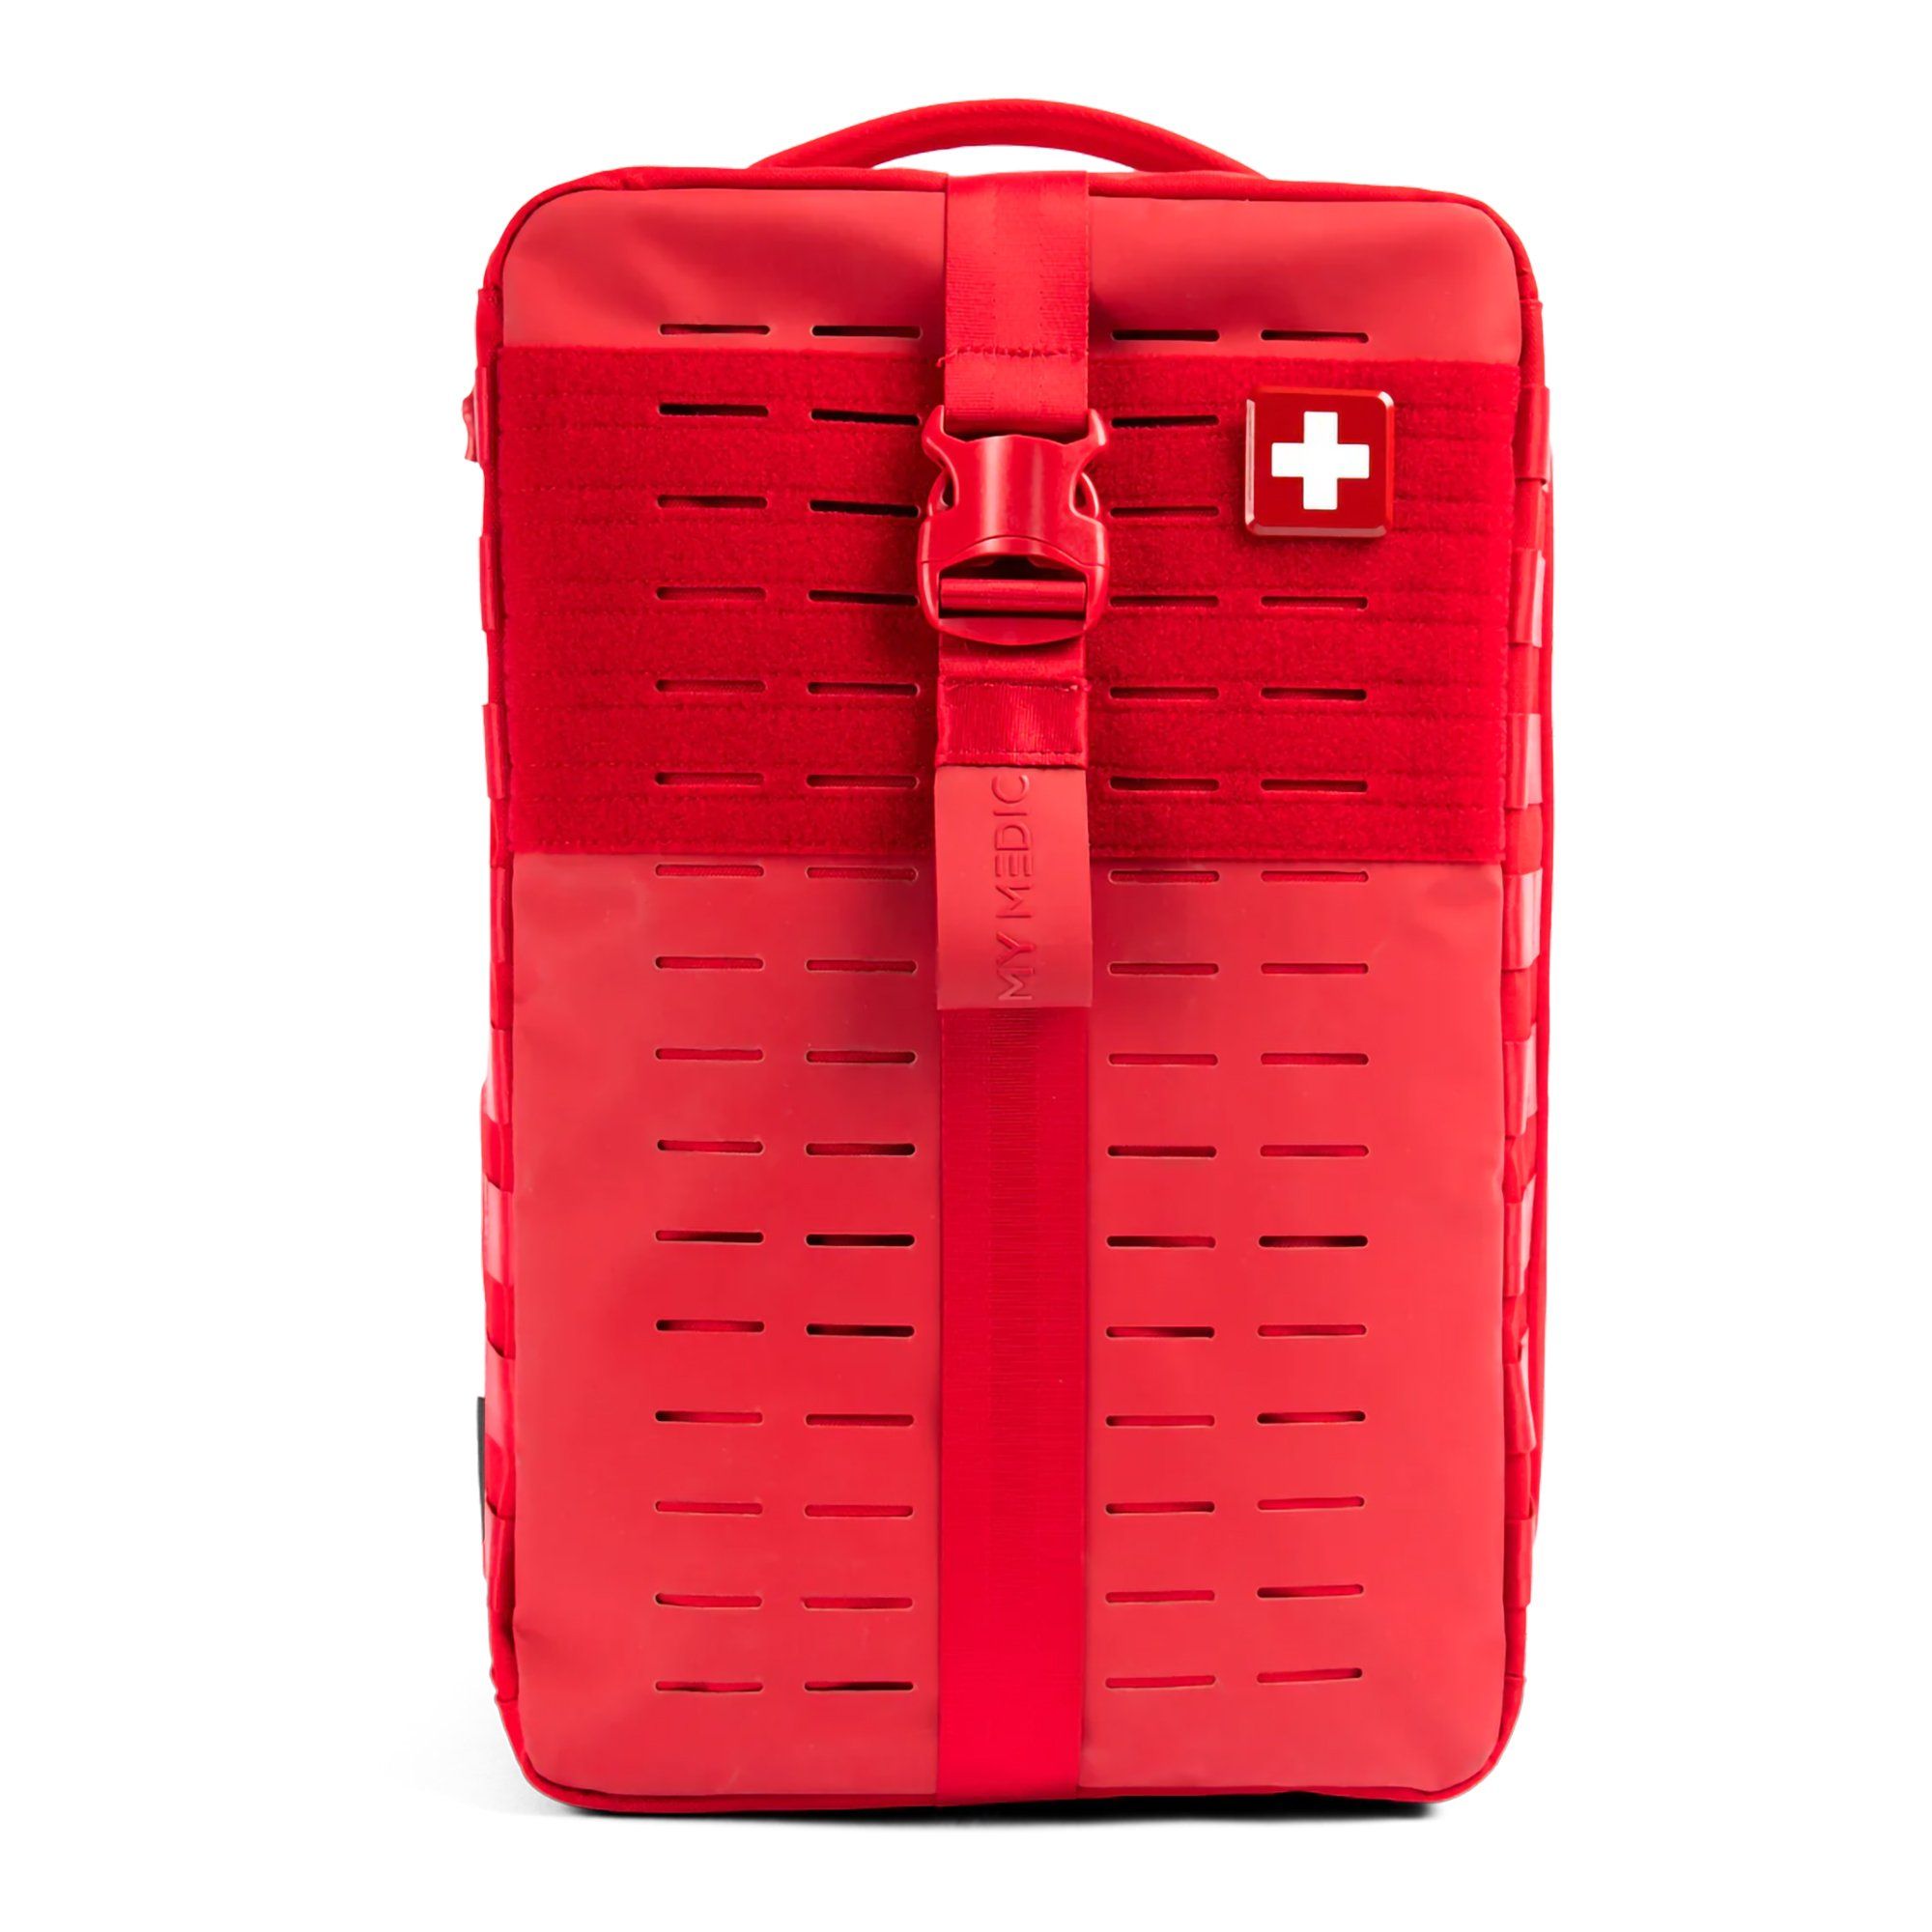 My Medic - SCOUT Portable Medical First Aid Kit - Red